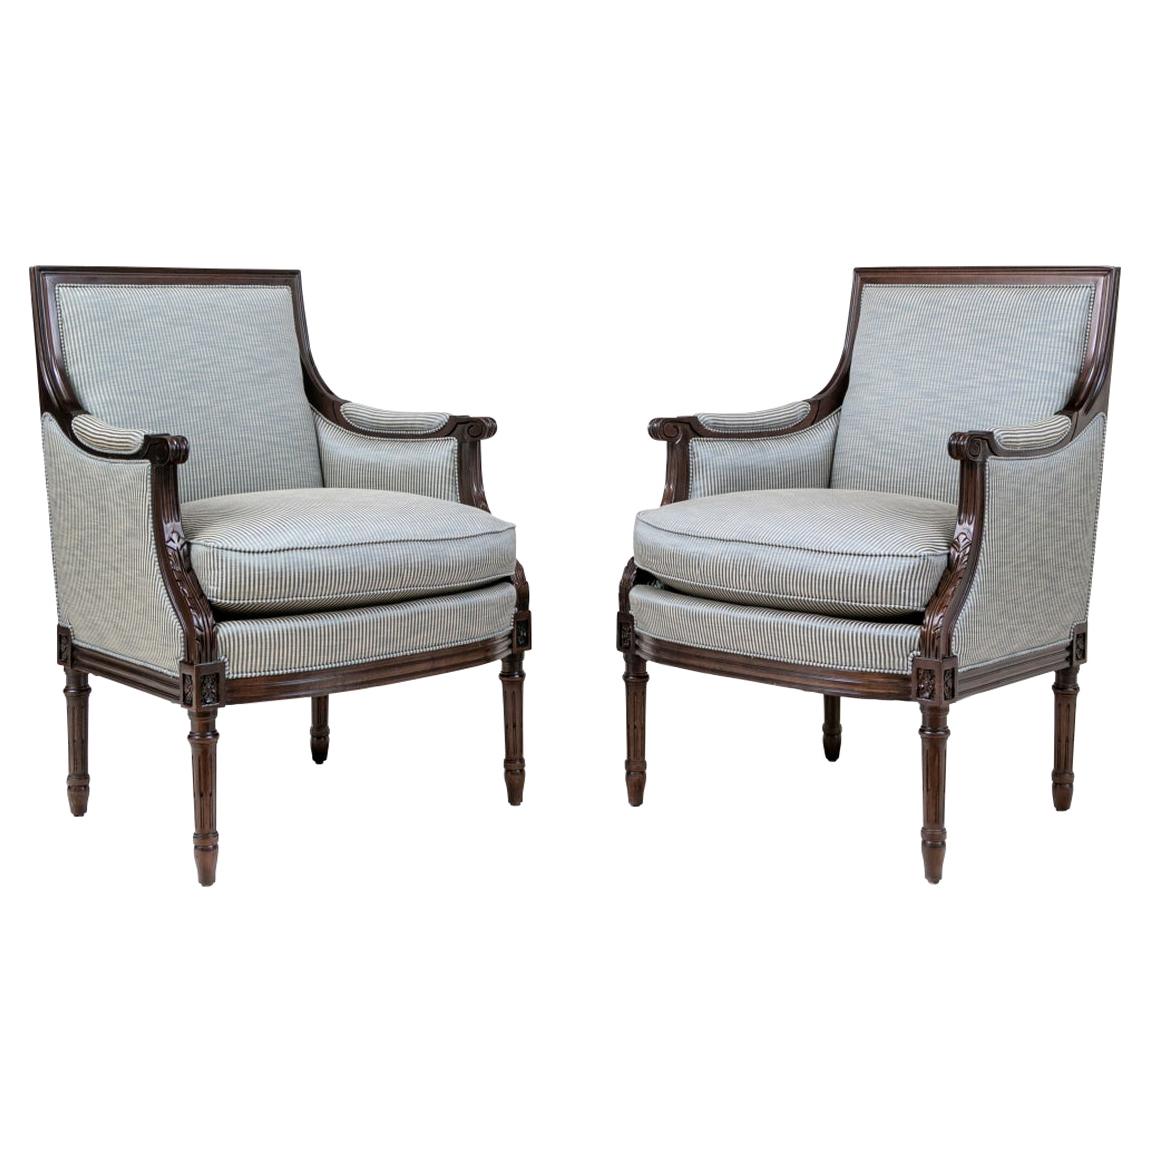 Pair of Very Fine Club Chairs by Hancock & Moore